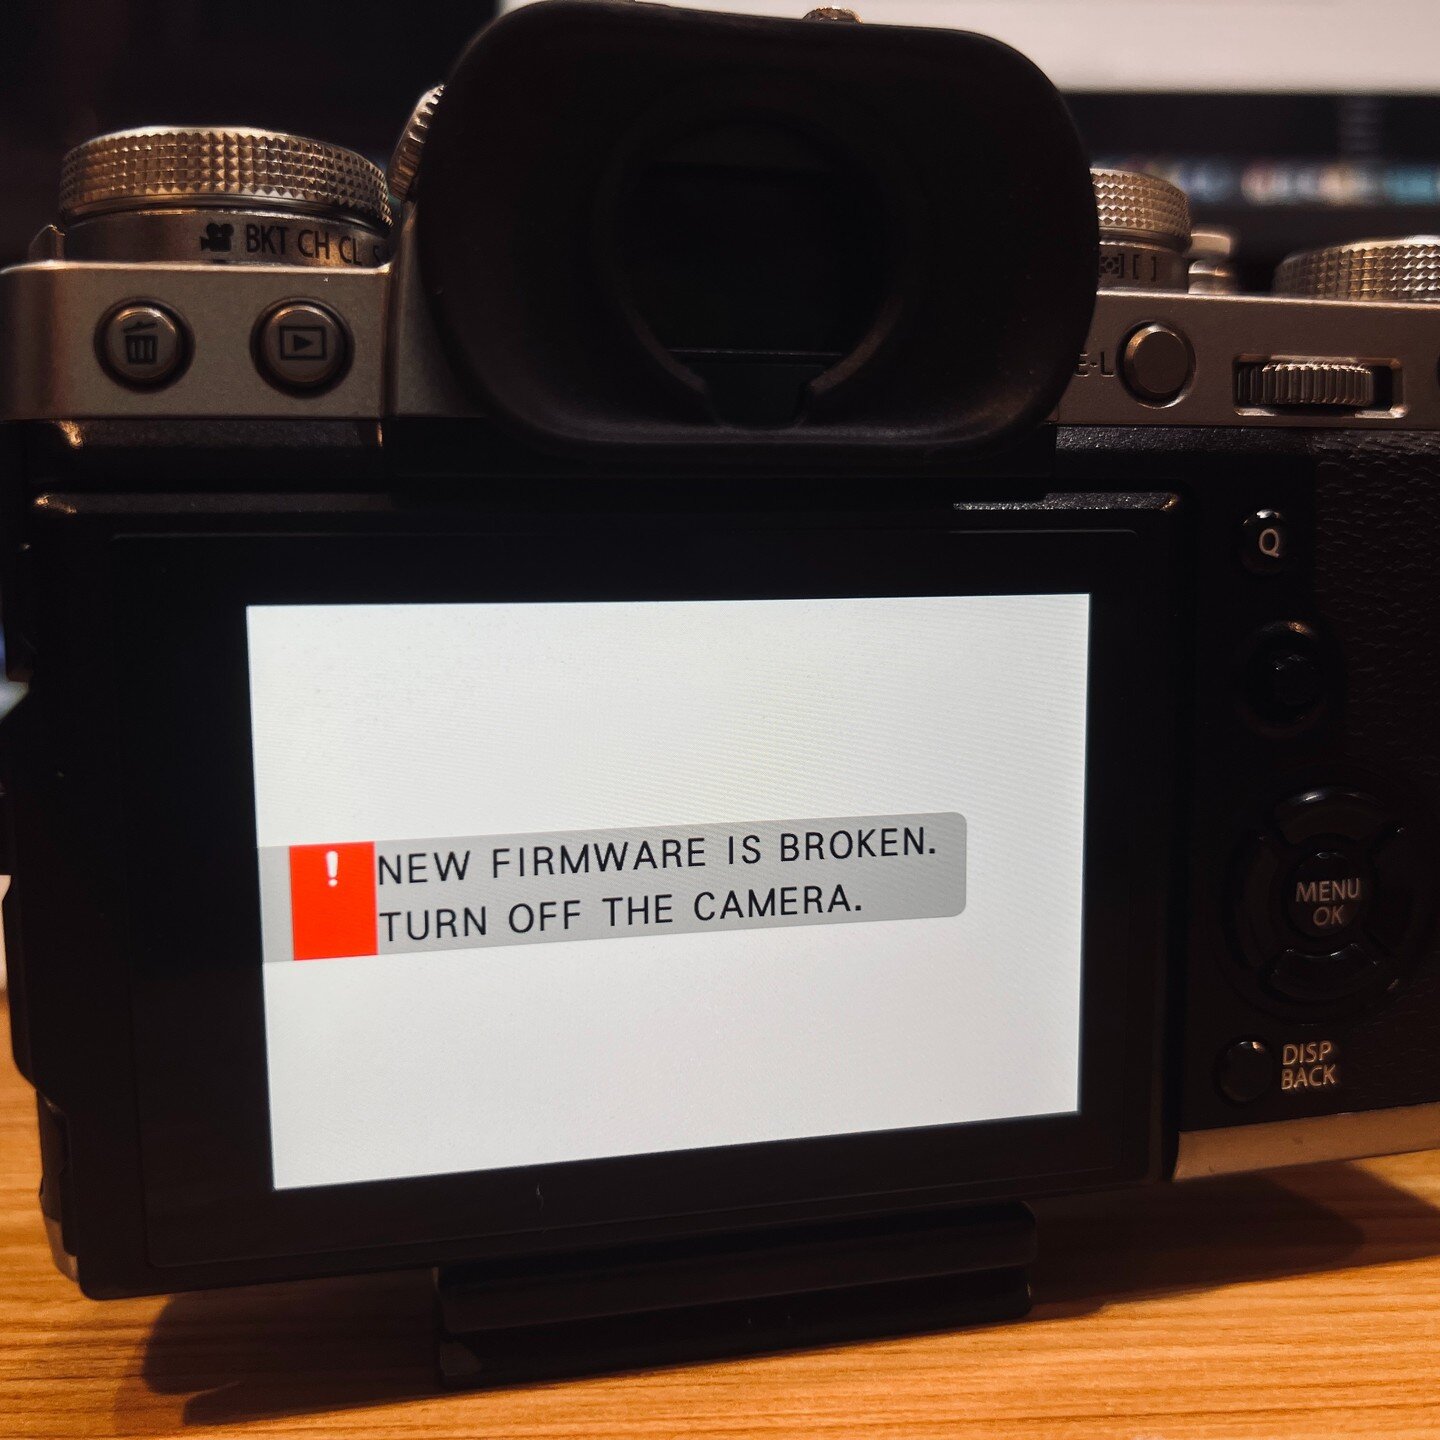 IMPORTANT FIRMWARE TIP! If you see this error message when trying to install the firmware, you need to make sure that your SD card is formatted. I had this problem tonight and figured out the solution: 

1 Make sure you use the same camera to fully f